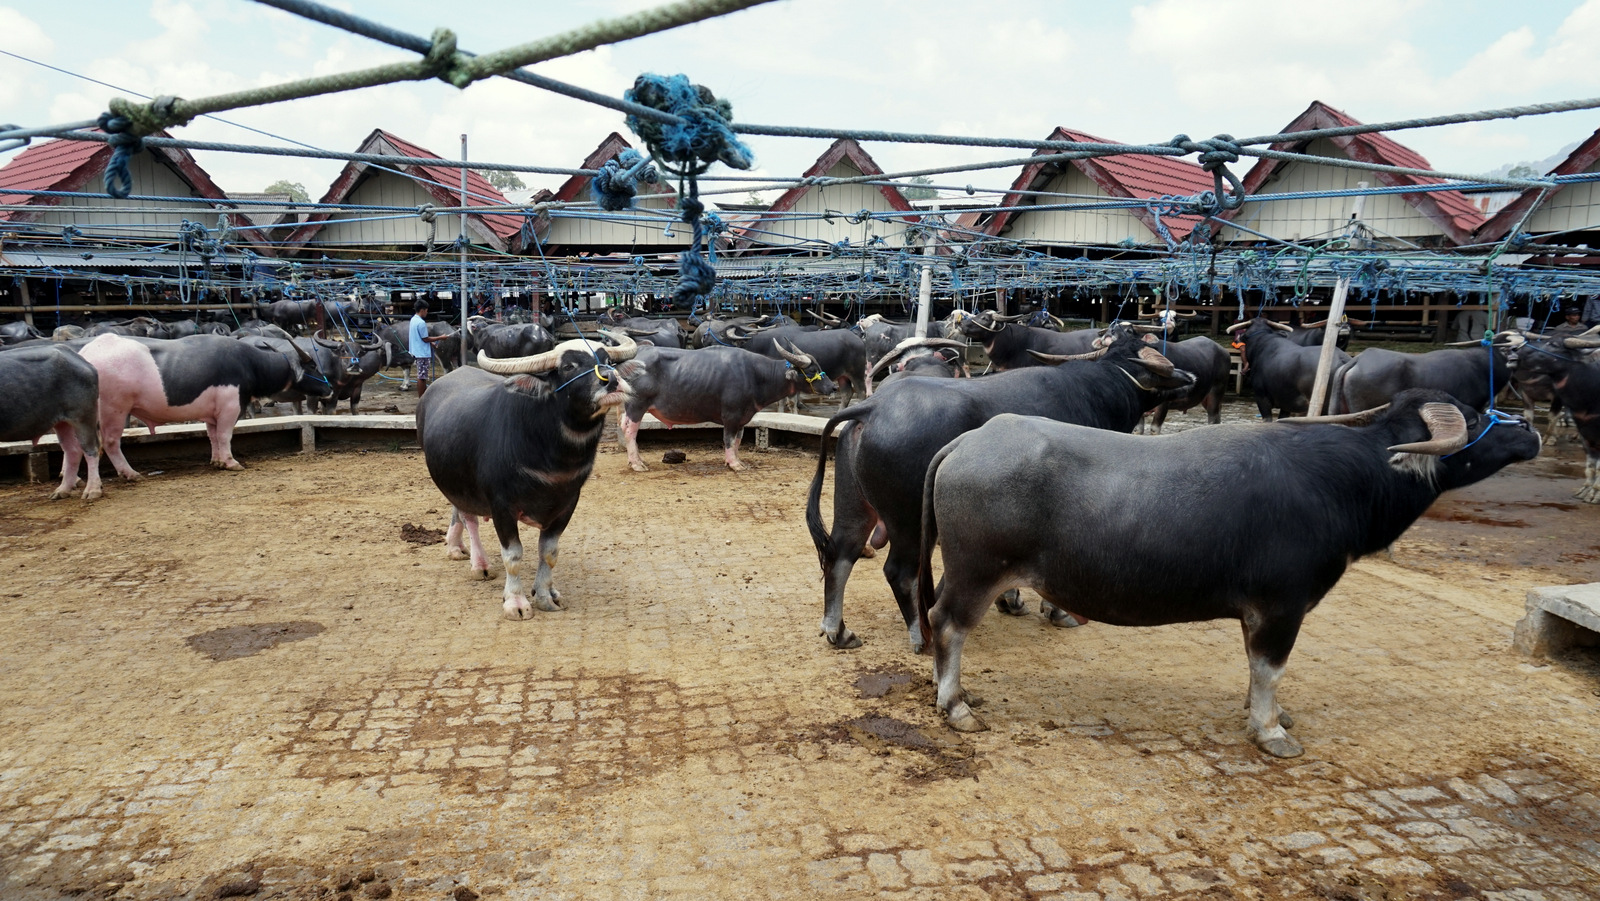 The Pasar Bolu Cattle Market in the town of Rantepao - where buffalos, pigs and roosters are traded. Every Tuesday and Sunday, the market becomes a riot of noise, as buyers and sellers mutter negotiations. A regular buffalo can be sold at 25 million rupiah (US$1,650) while a white spotted one can pull a cool 50 million rupiah (US$3,700). Photo by Upneet Kaur-Nagpal